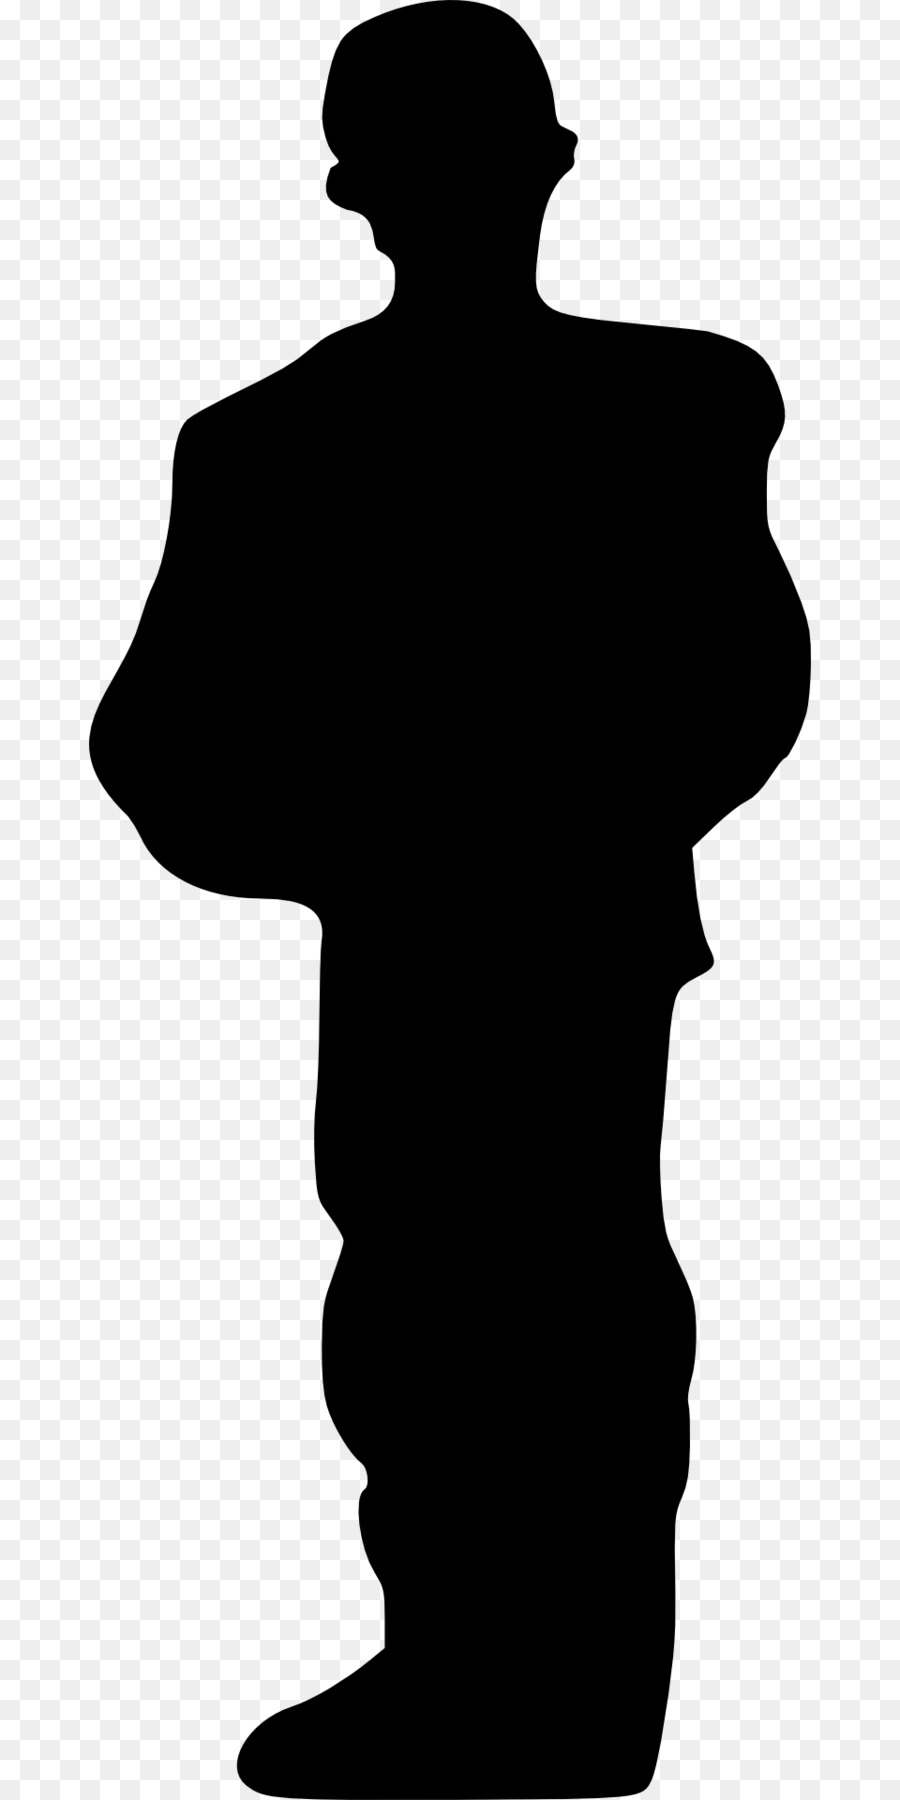 Silhouette Clip art - man png download - 960*1920 - Free Transparent Silhouette png Download.